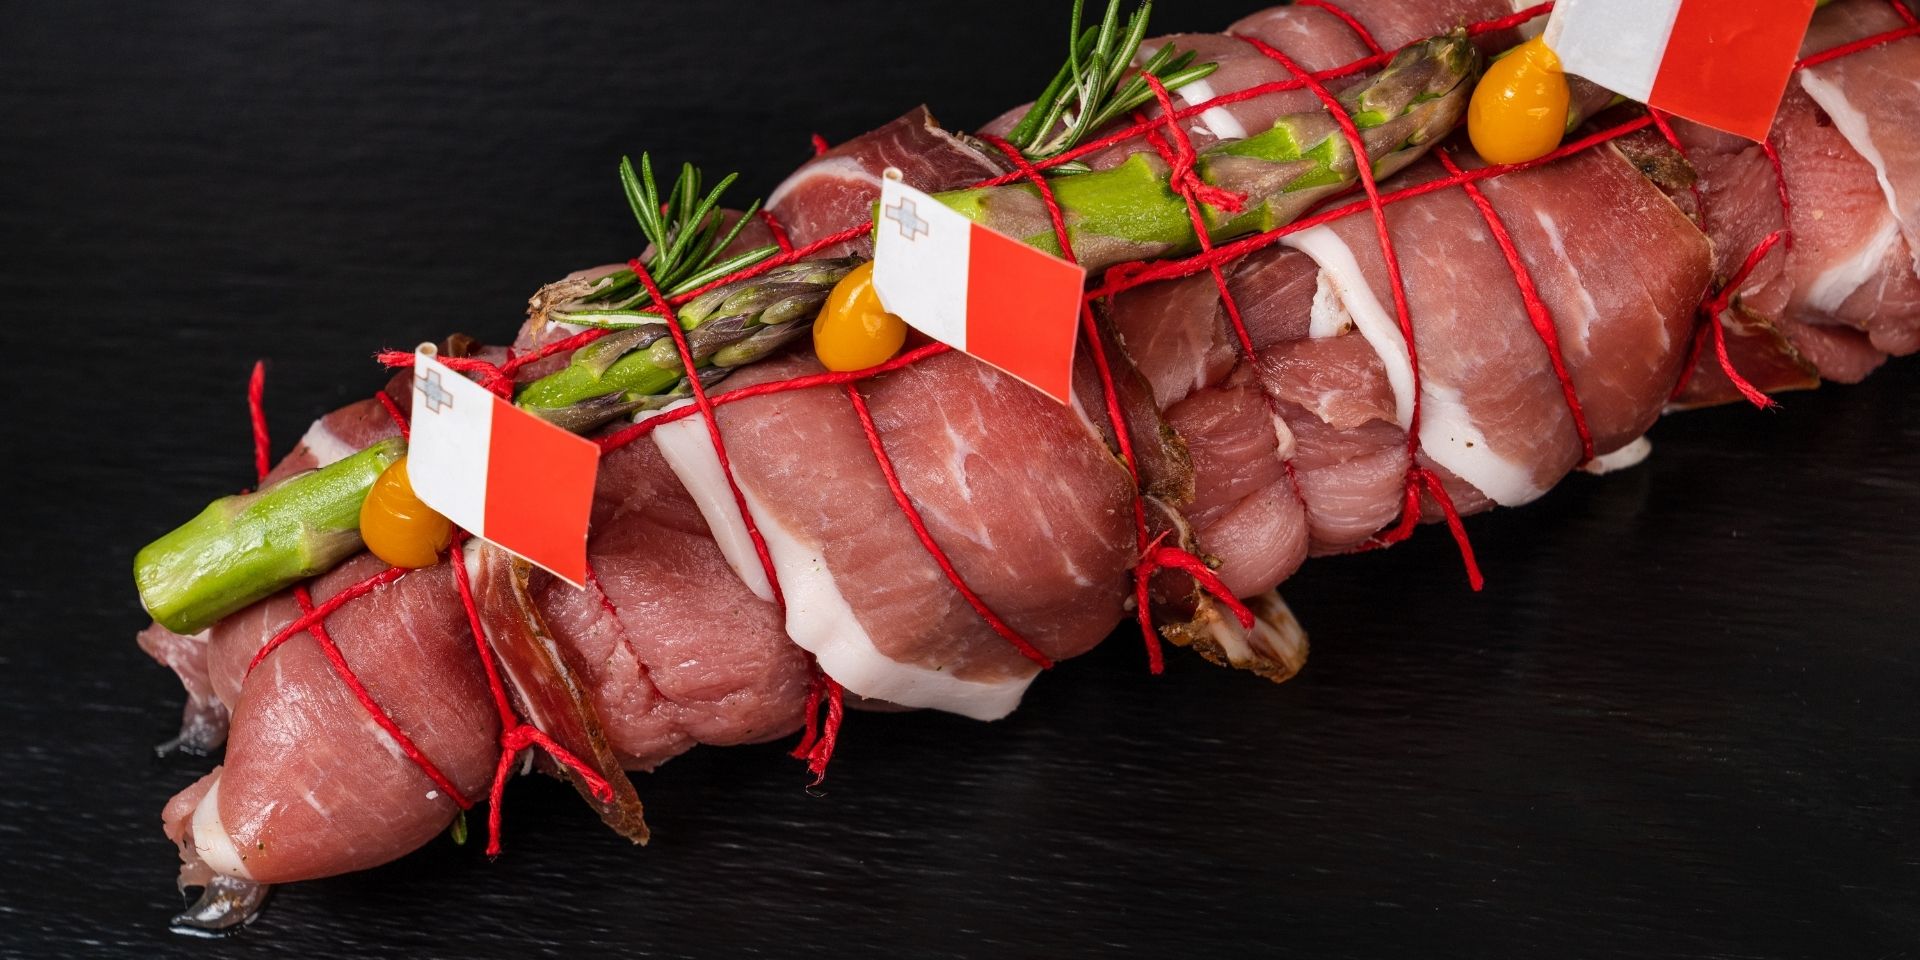 Stuffed Pork Fillet made inhouse available in Malta